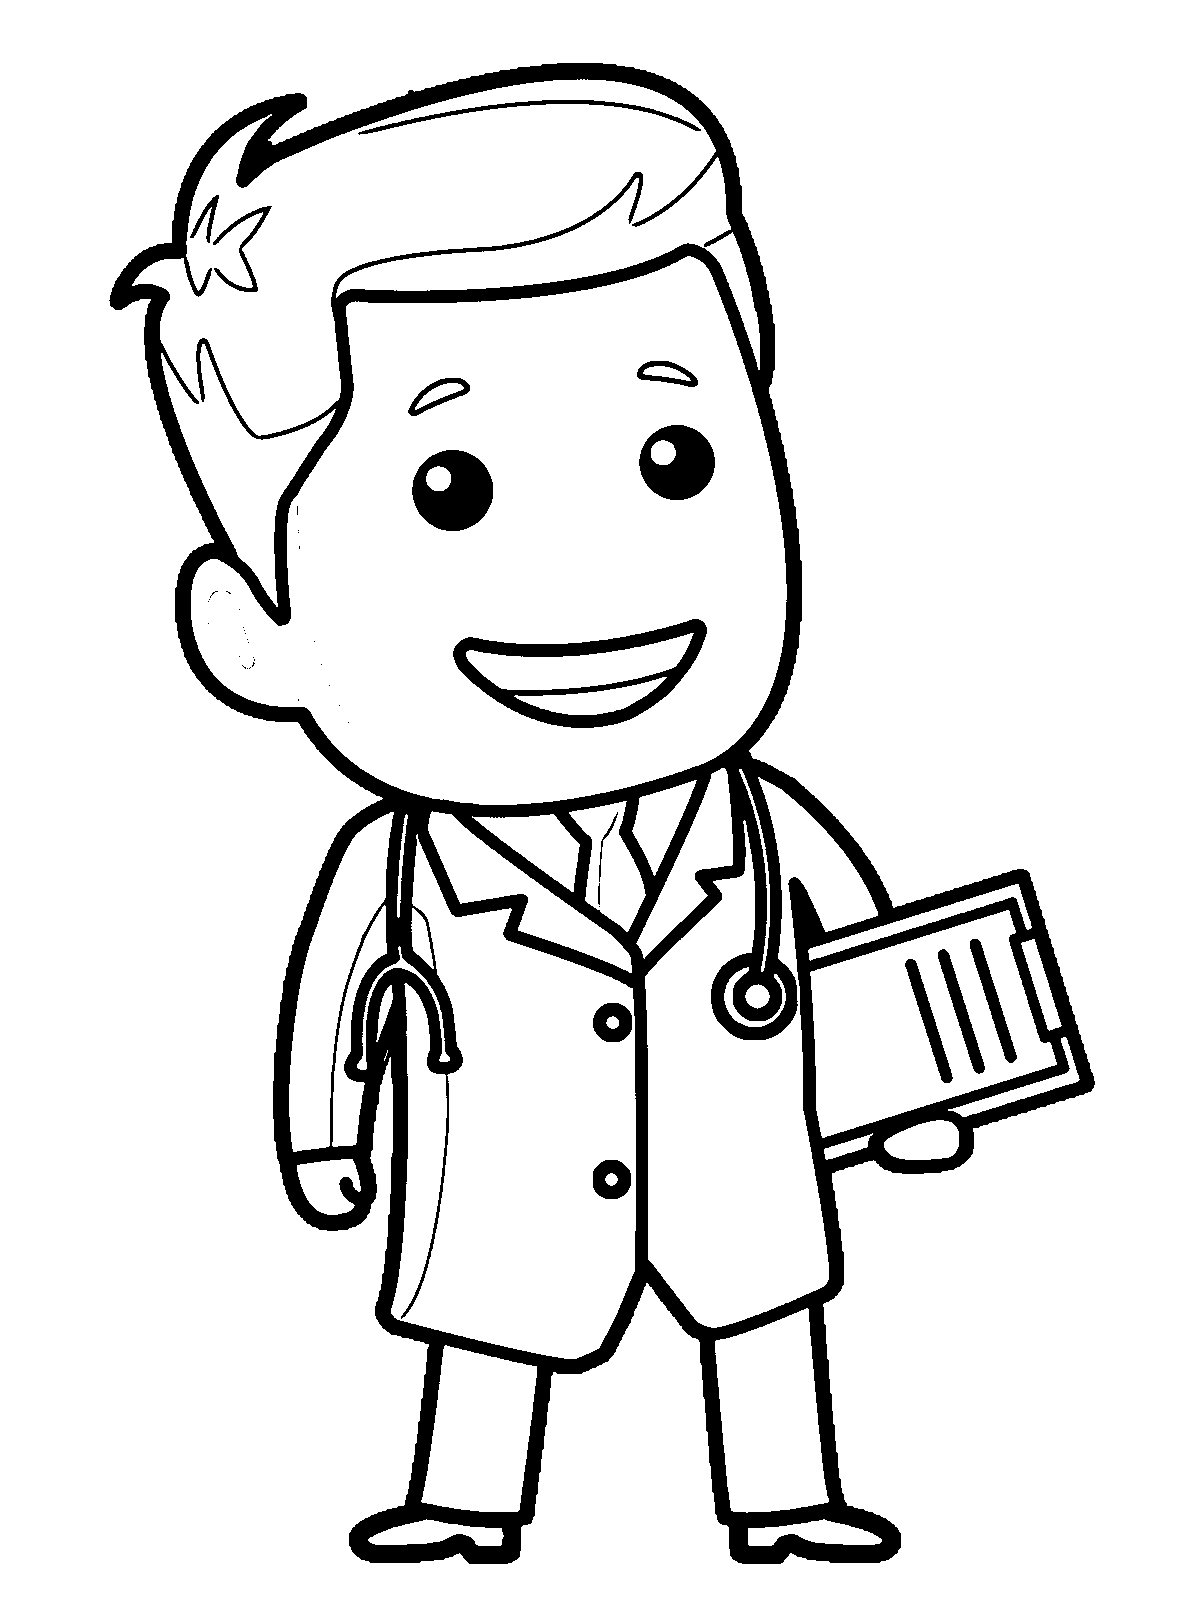 Free A Doctor Coloring Page, Download Free A Doctor Coloring Page png